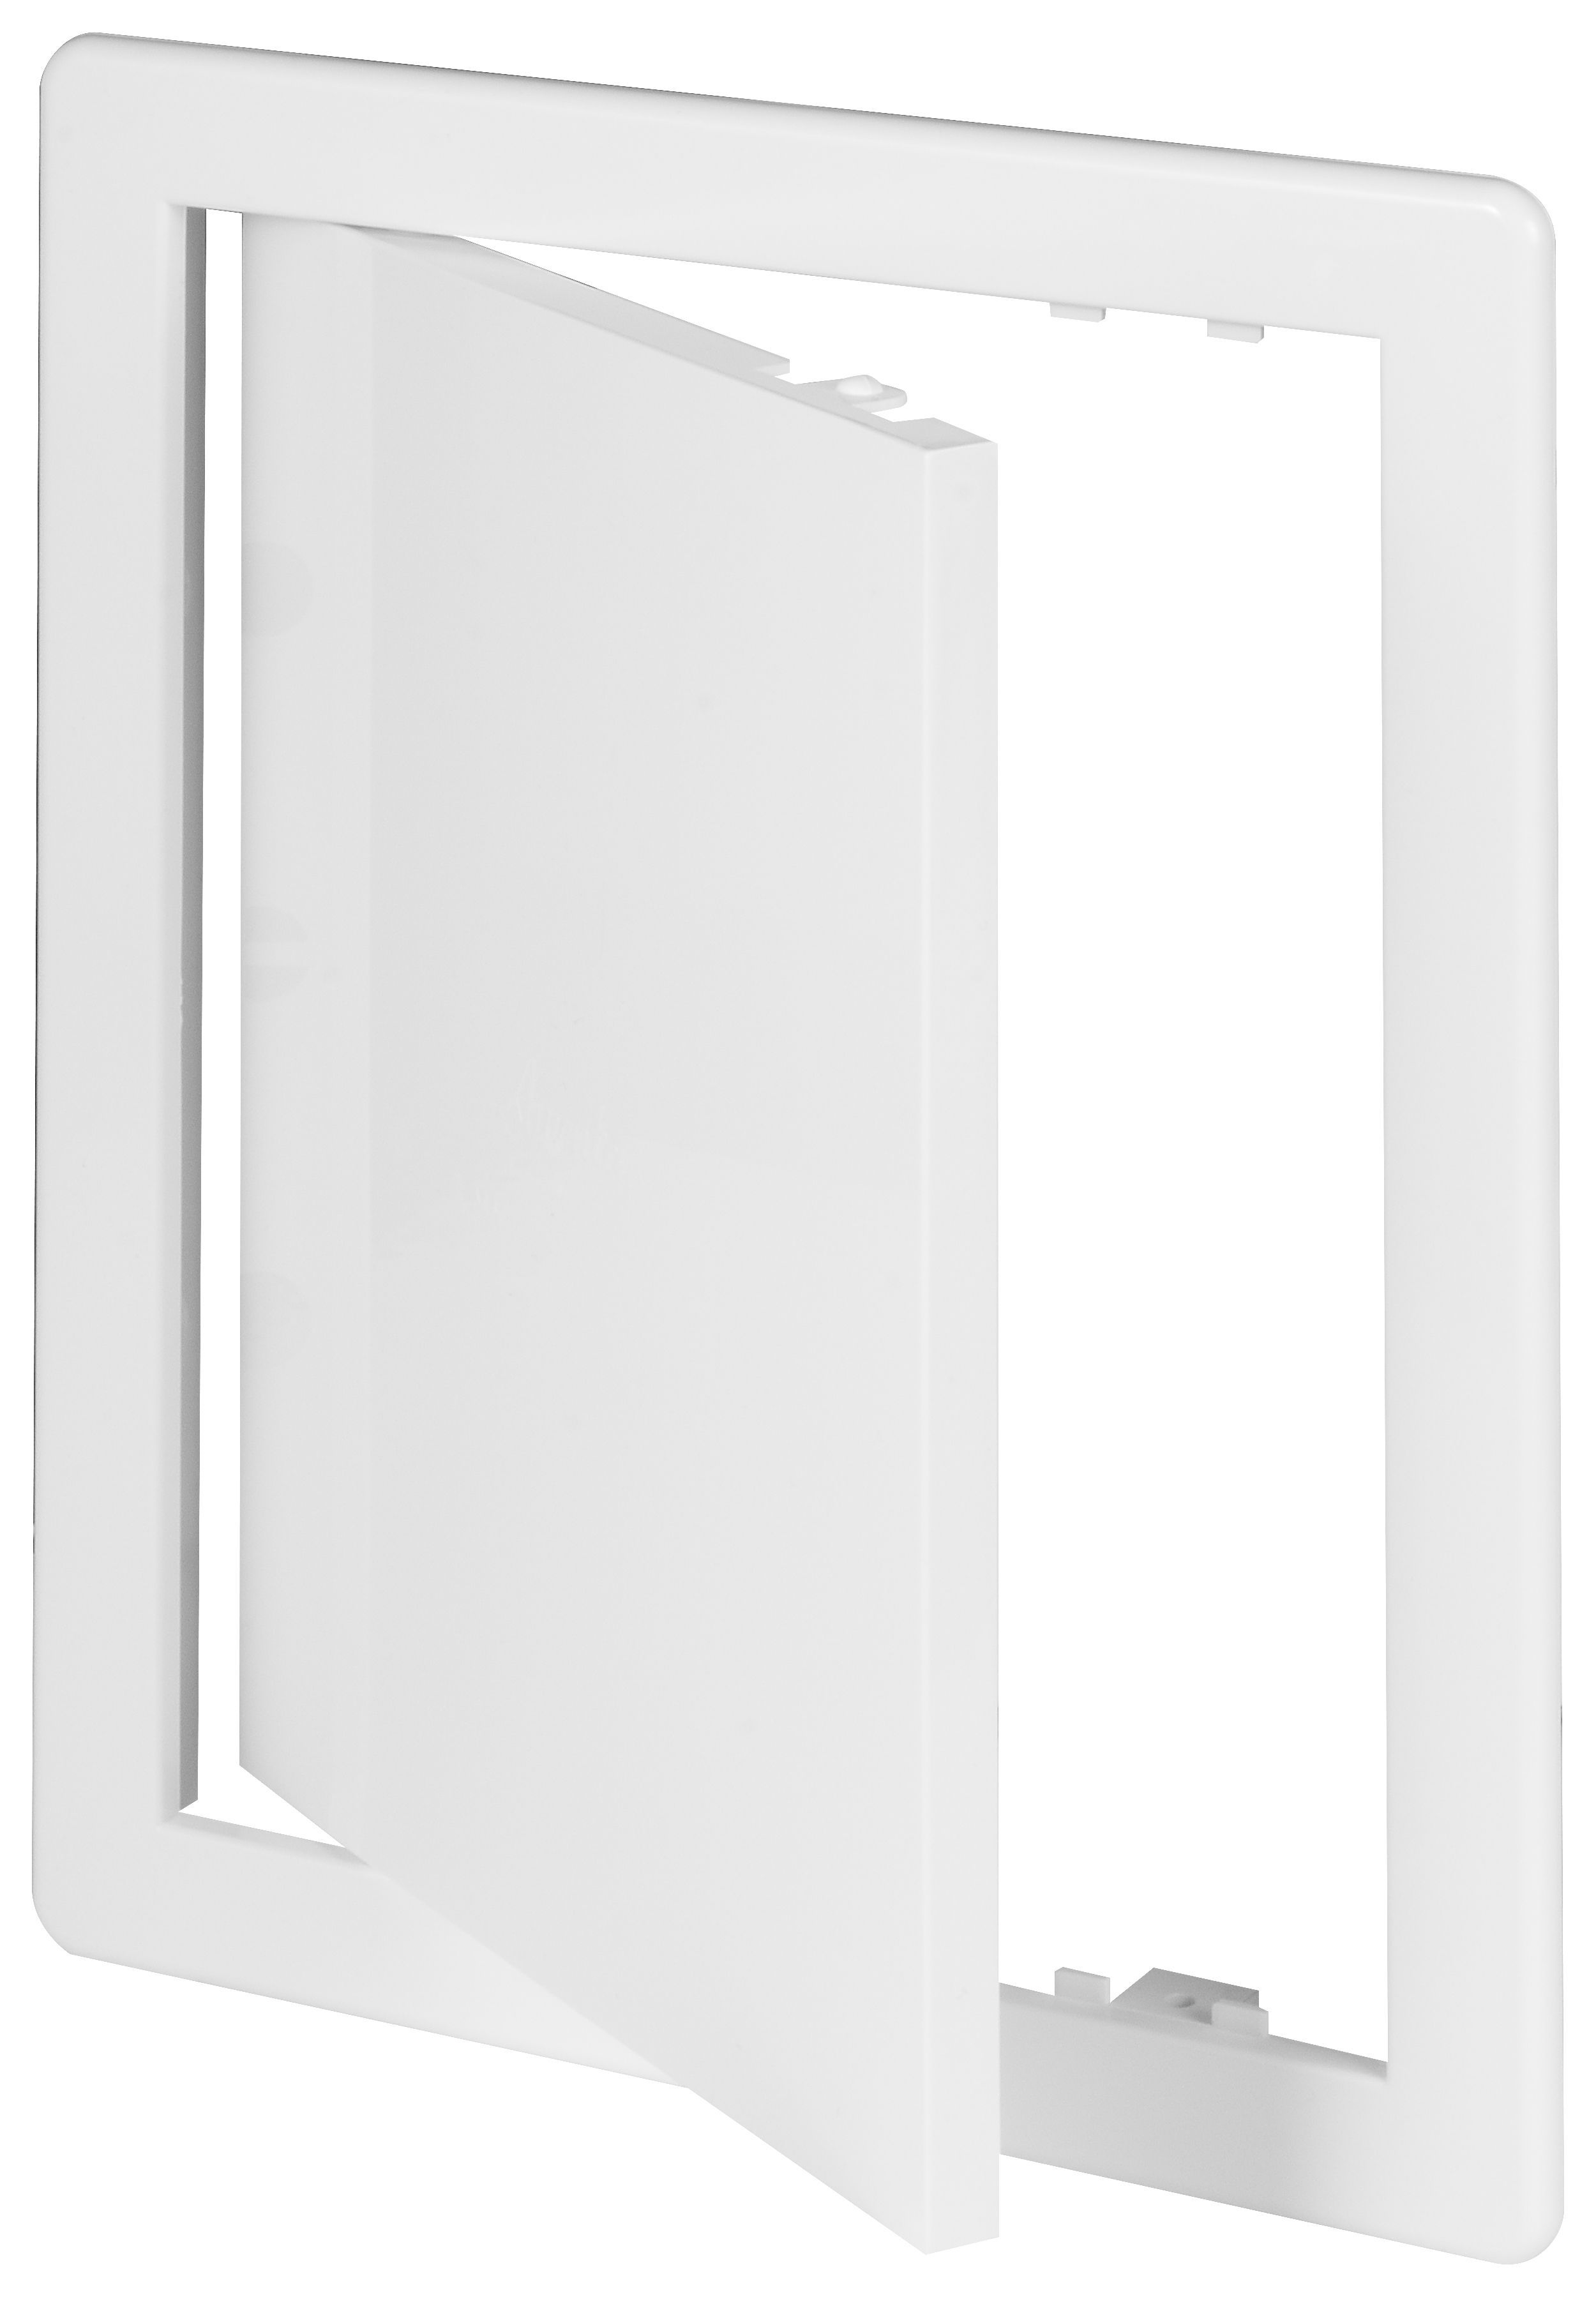 Diall White Plastic Access panel, (H)218mm (W)168mm